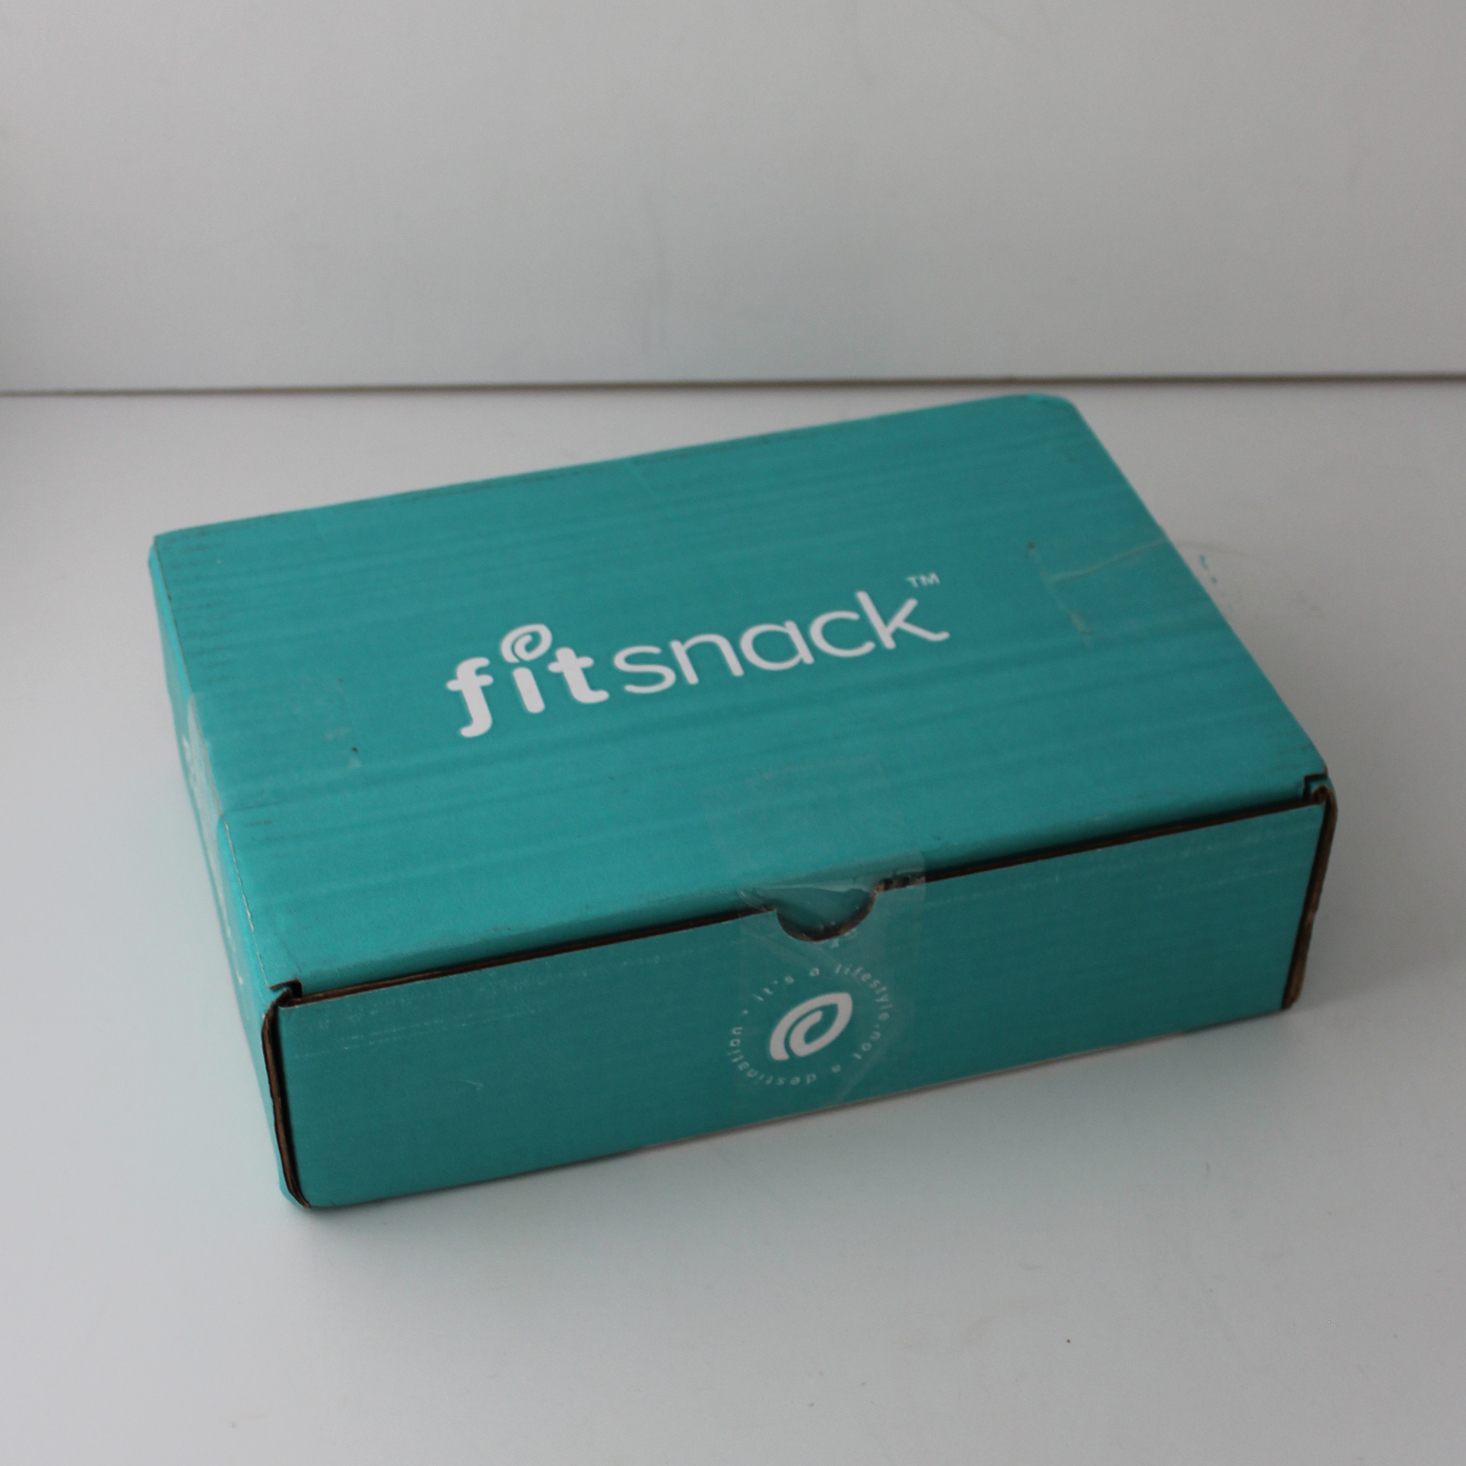 Fit Snack Subscription Box Review – March 2020